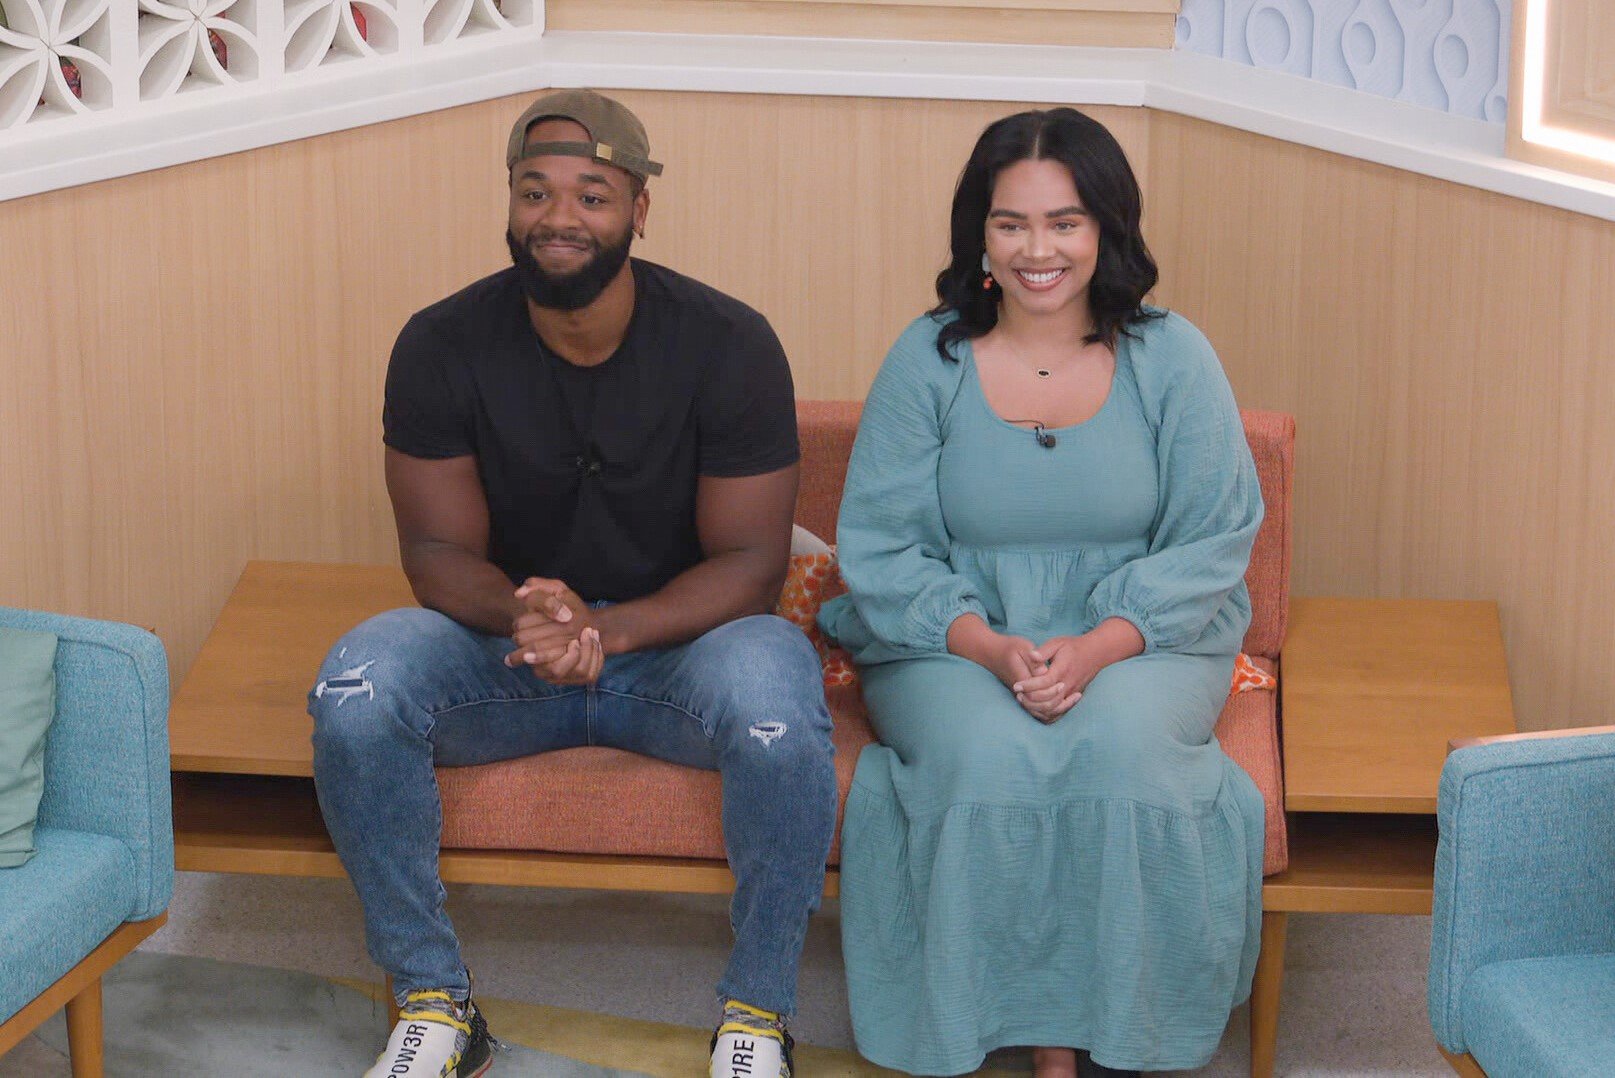 Monte Taylor and Jasmine Davis, who, according to 'Big Brother 24' spoilers, will sit on the block together on live eviction night, sit in the nomination chairs. Monte wears a black shirt, jeans, and a backwards brown baseball cap. Jasmine wears a light blue long-sleeved dress.